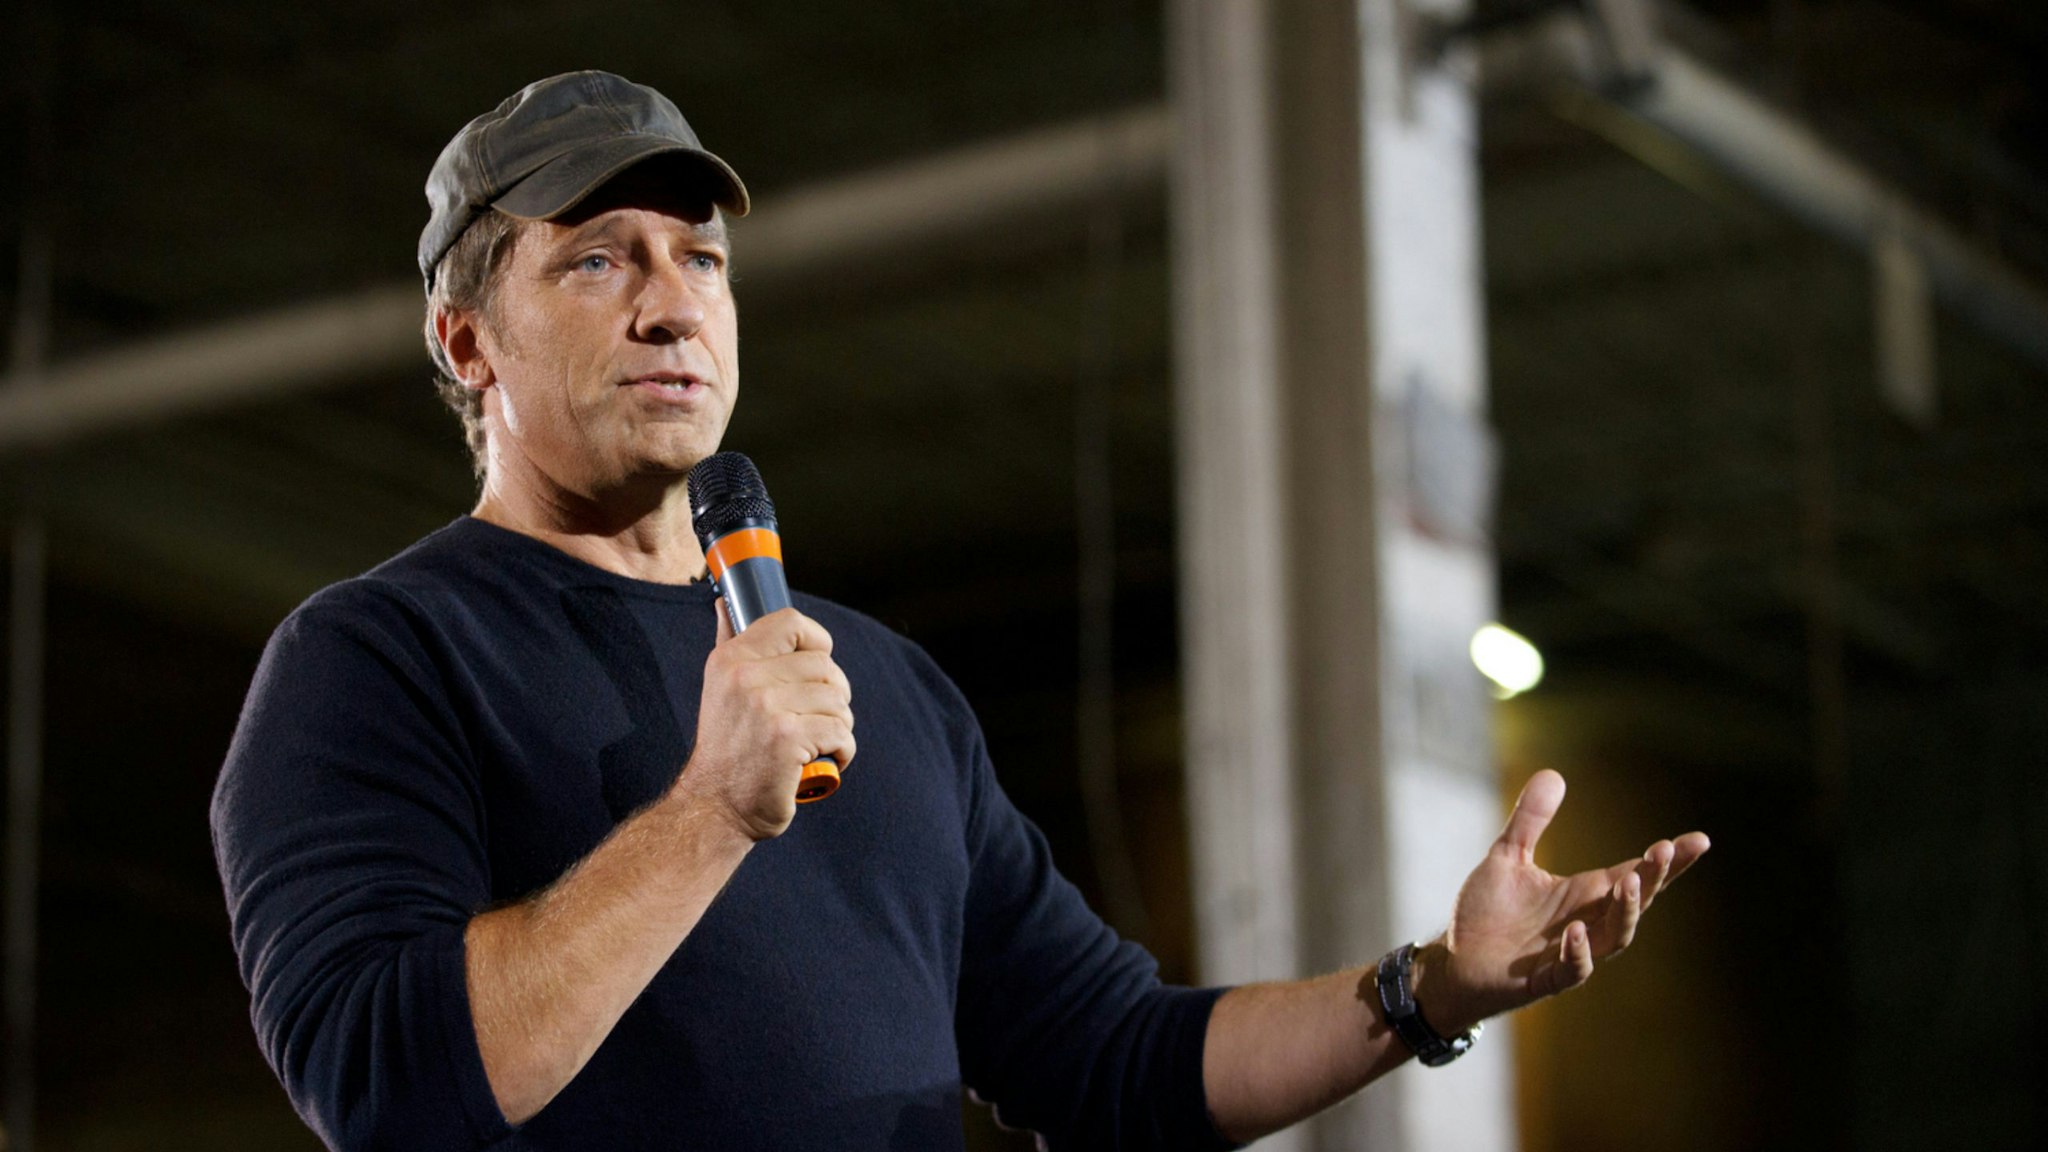 TV personality Mike Rowe , host of "Dirty Jobs", takes part in a roundtable discussion on manufacturing with Republican presidential candidate Mitt RomneySeptember 26, 2012 American Spring Wire in Bedford Heights, Ohio.